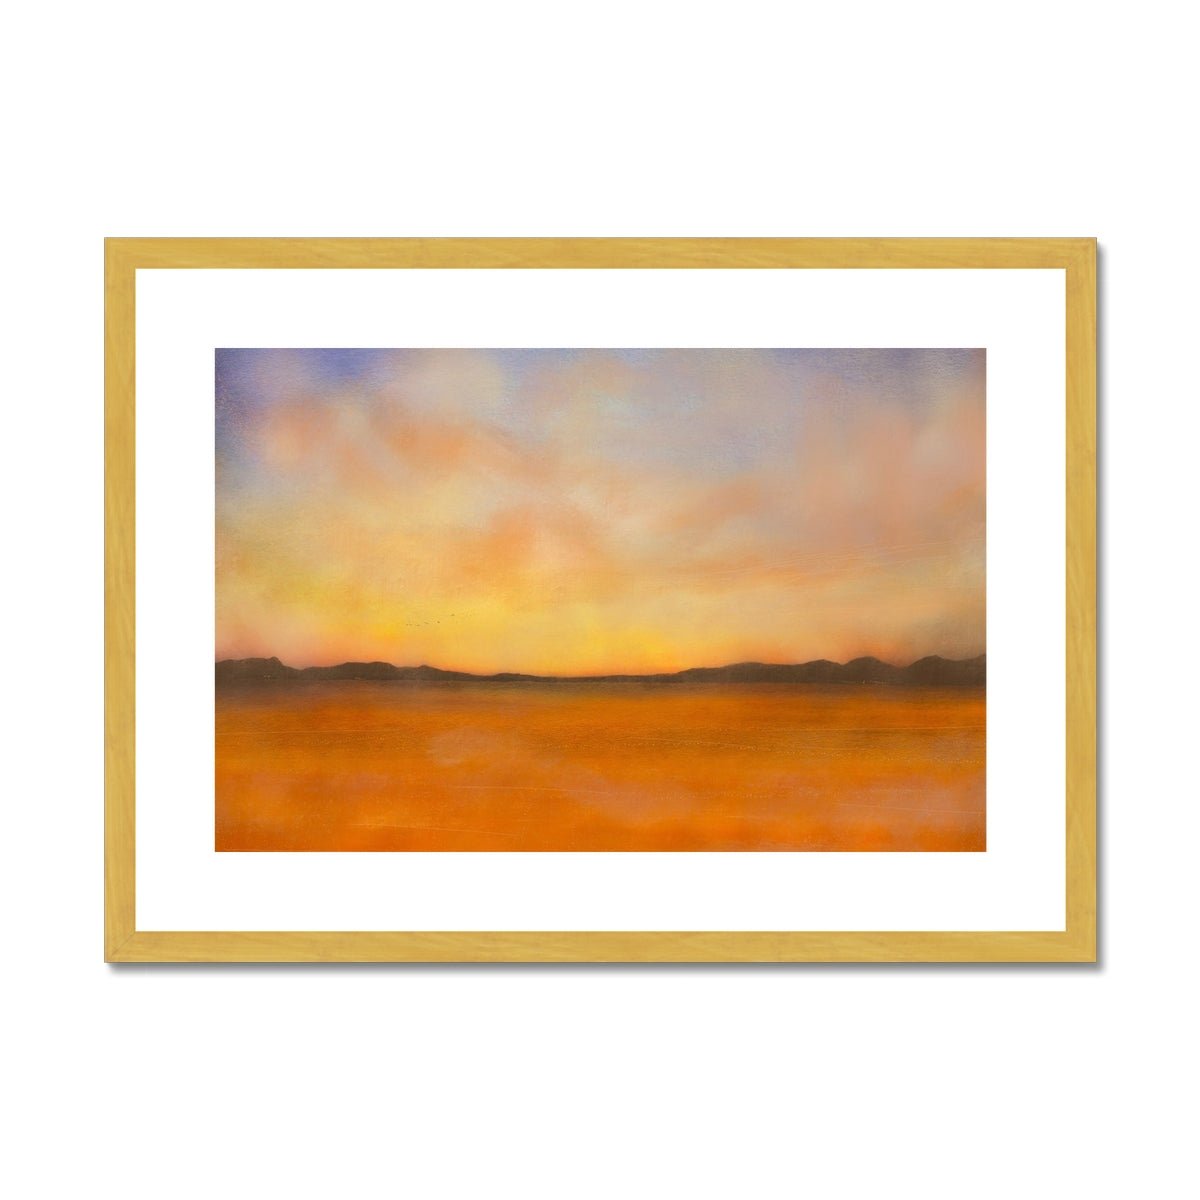 Islay Dawn Painting | Antique Framed & Mounted Prints From Scotland-Antique Framed & Mounted Prints-Hebridean Islands Art Gallery-A2 Landscape-Gold Frame-Paintings, Prints, Homeware, Art Gifts From Scotland By Scottish Artist Kevin Hunter